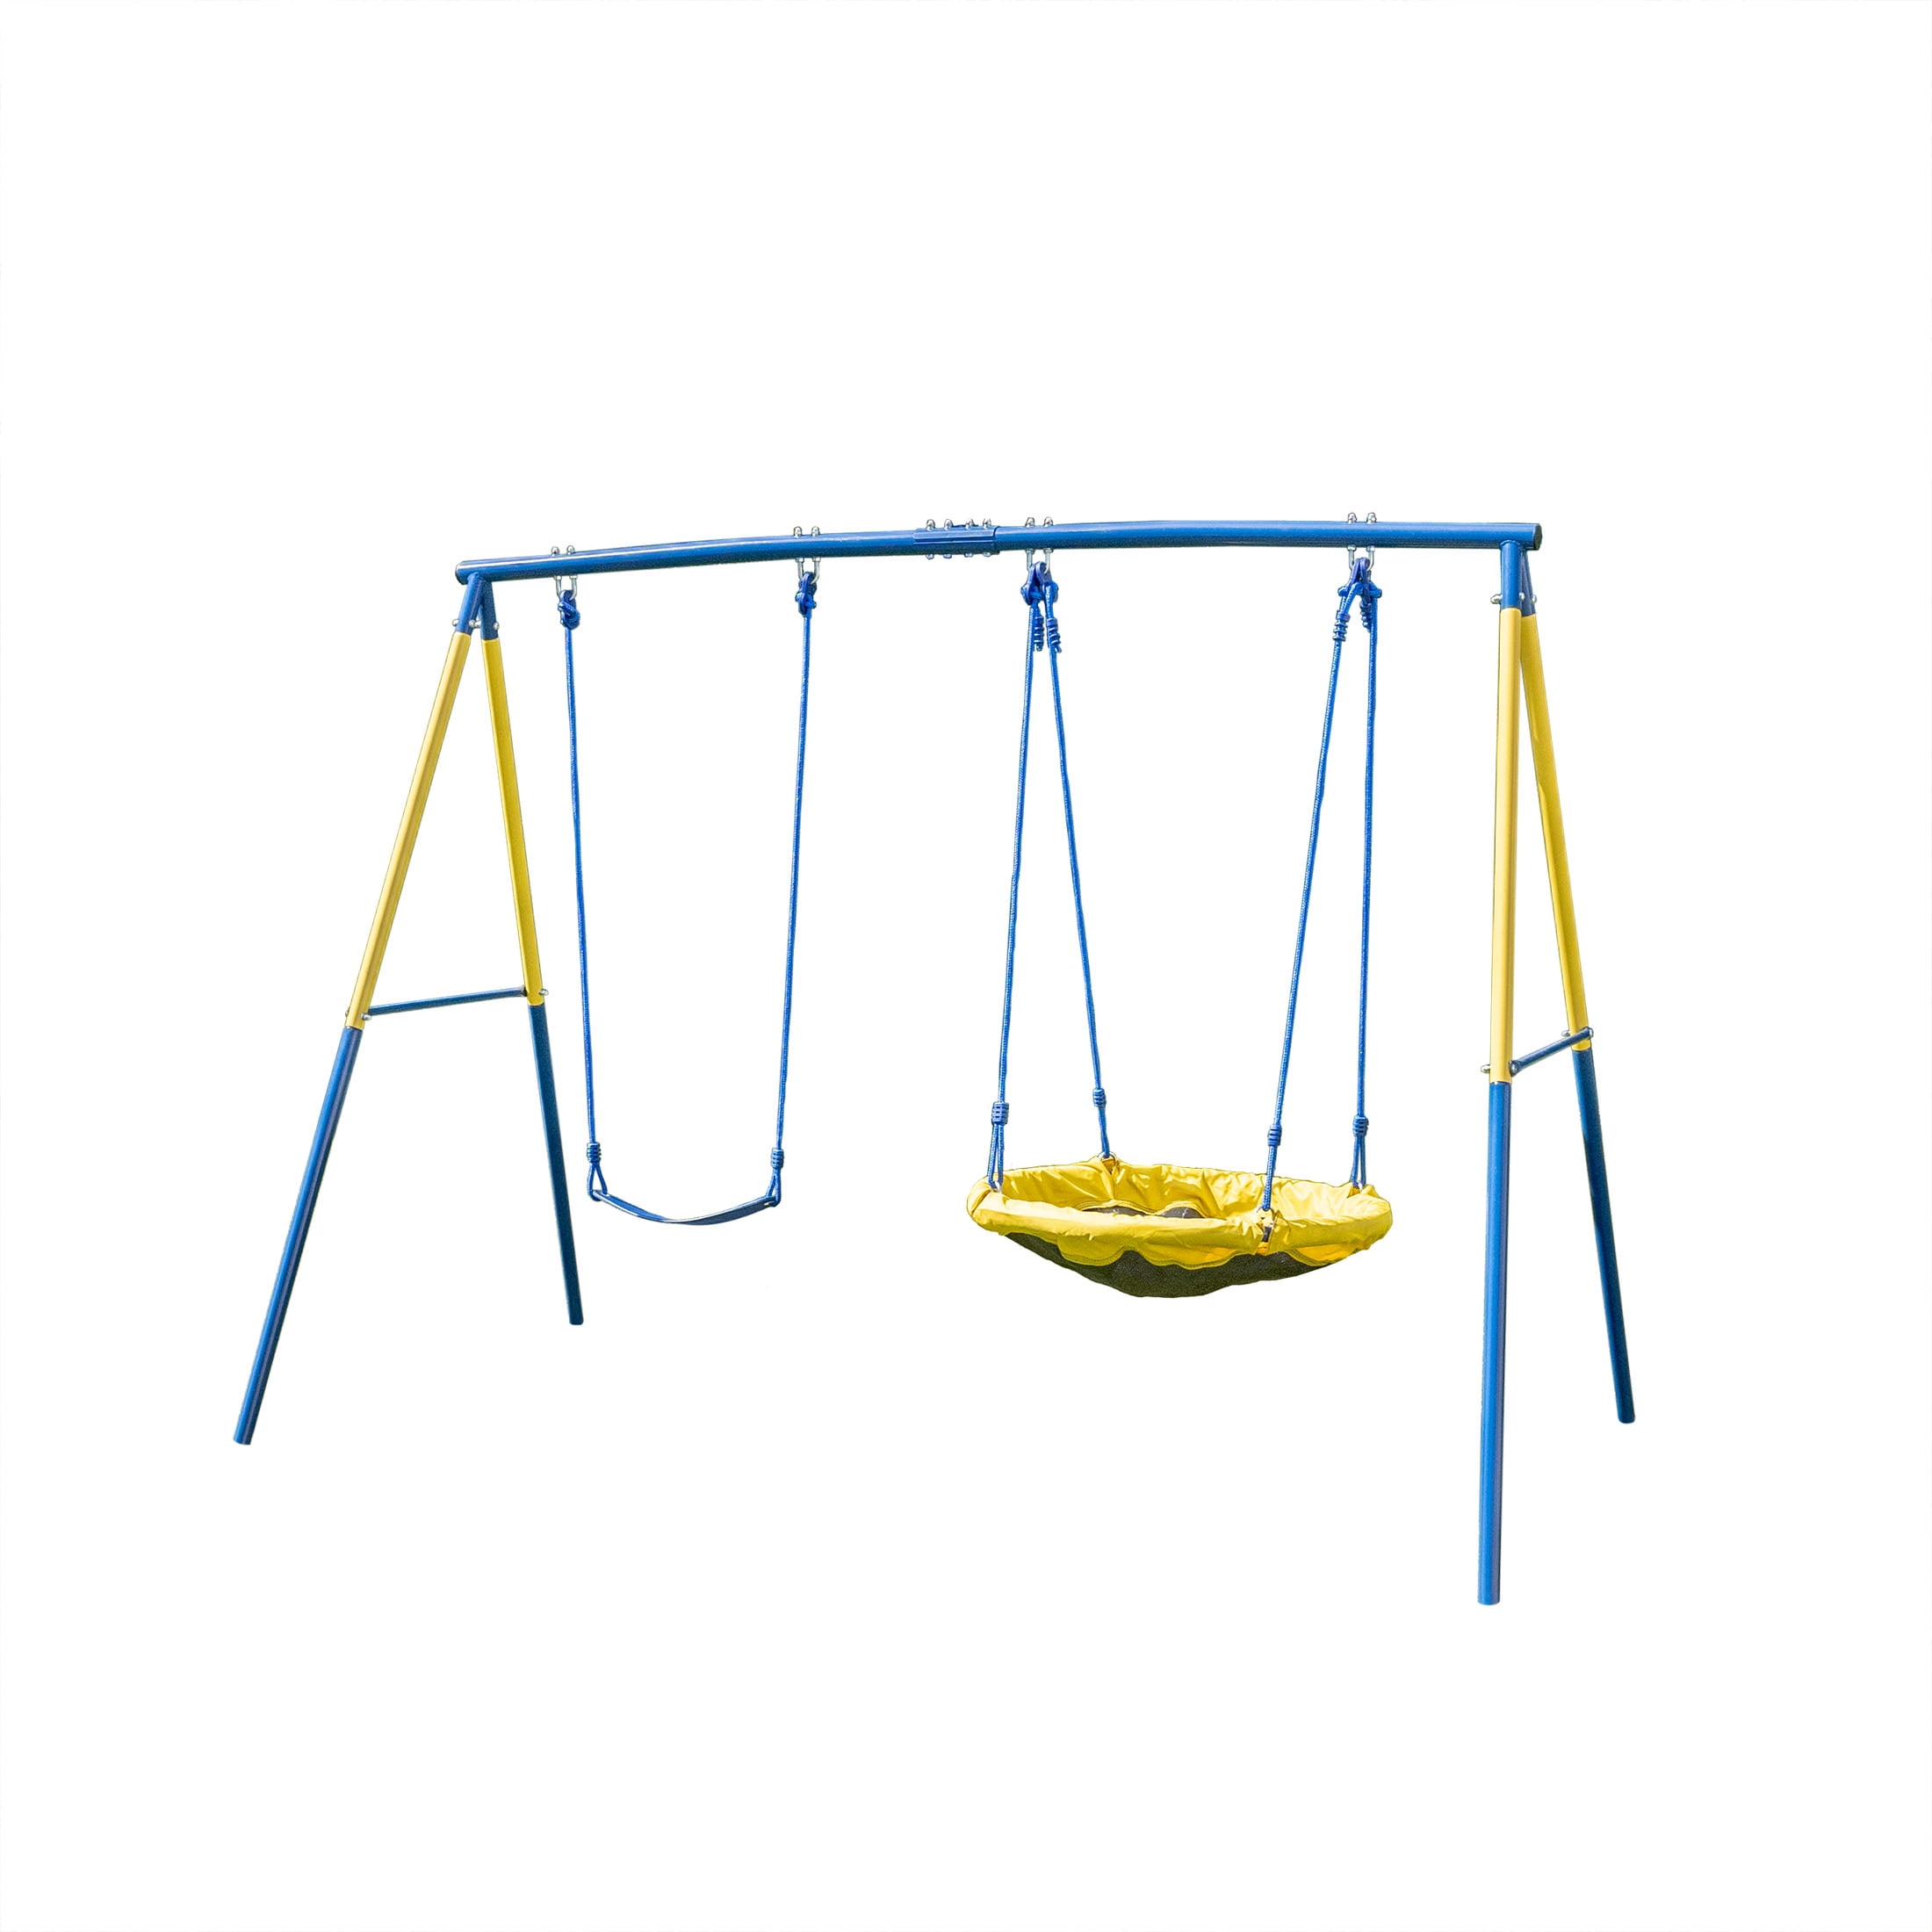 Sportspower Swing and Saucer Swing Metal Set with Heavy Duty Aframe, holds up to 550 lbs - 2